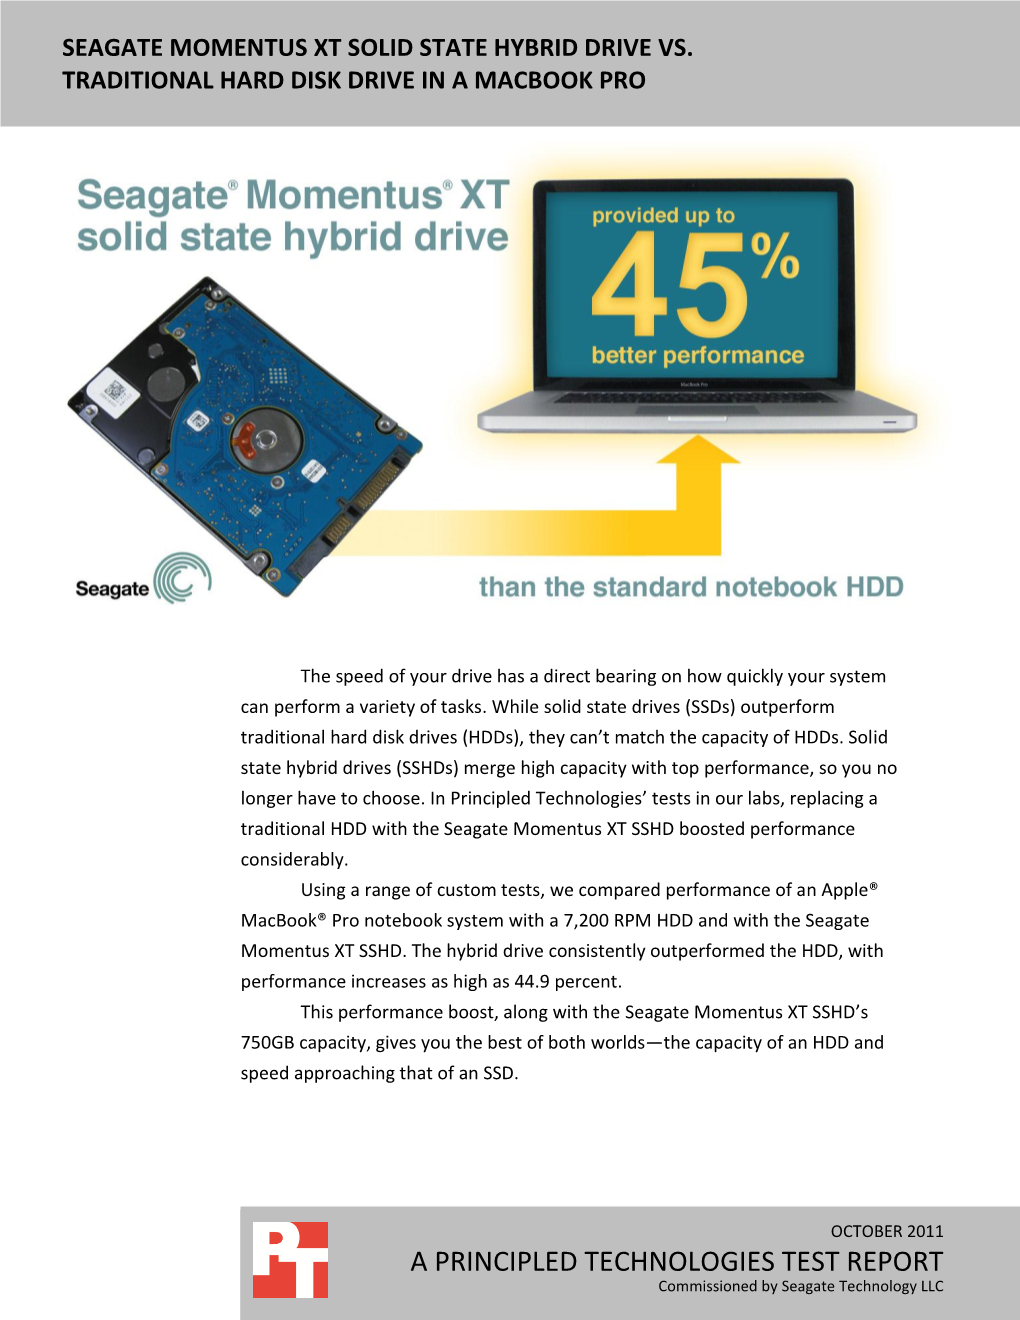 Seagate Momentus Xt Solid State Hybrid Drive Vs. Traditional Hard Disk Drive in a Macbook Pro